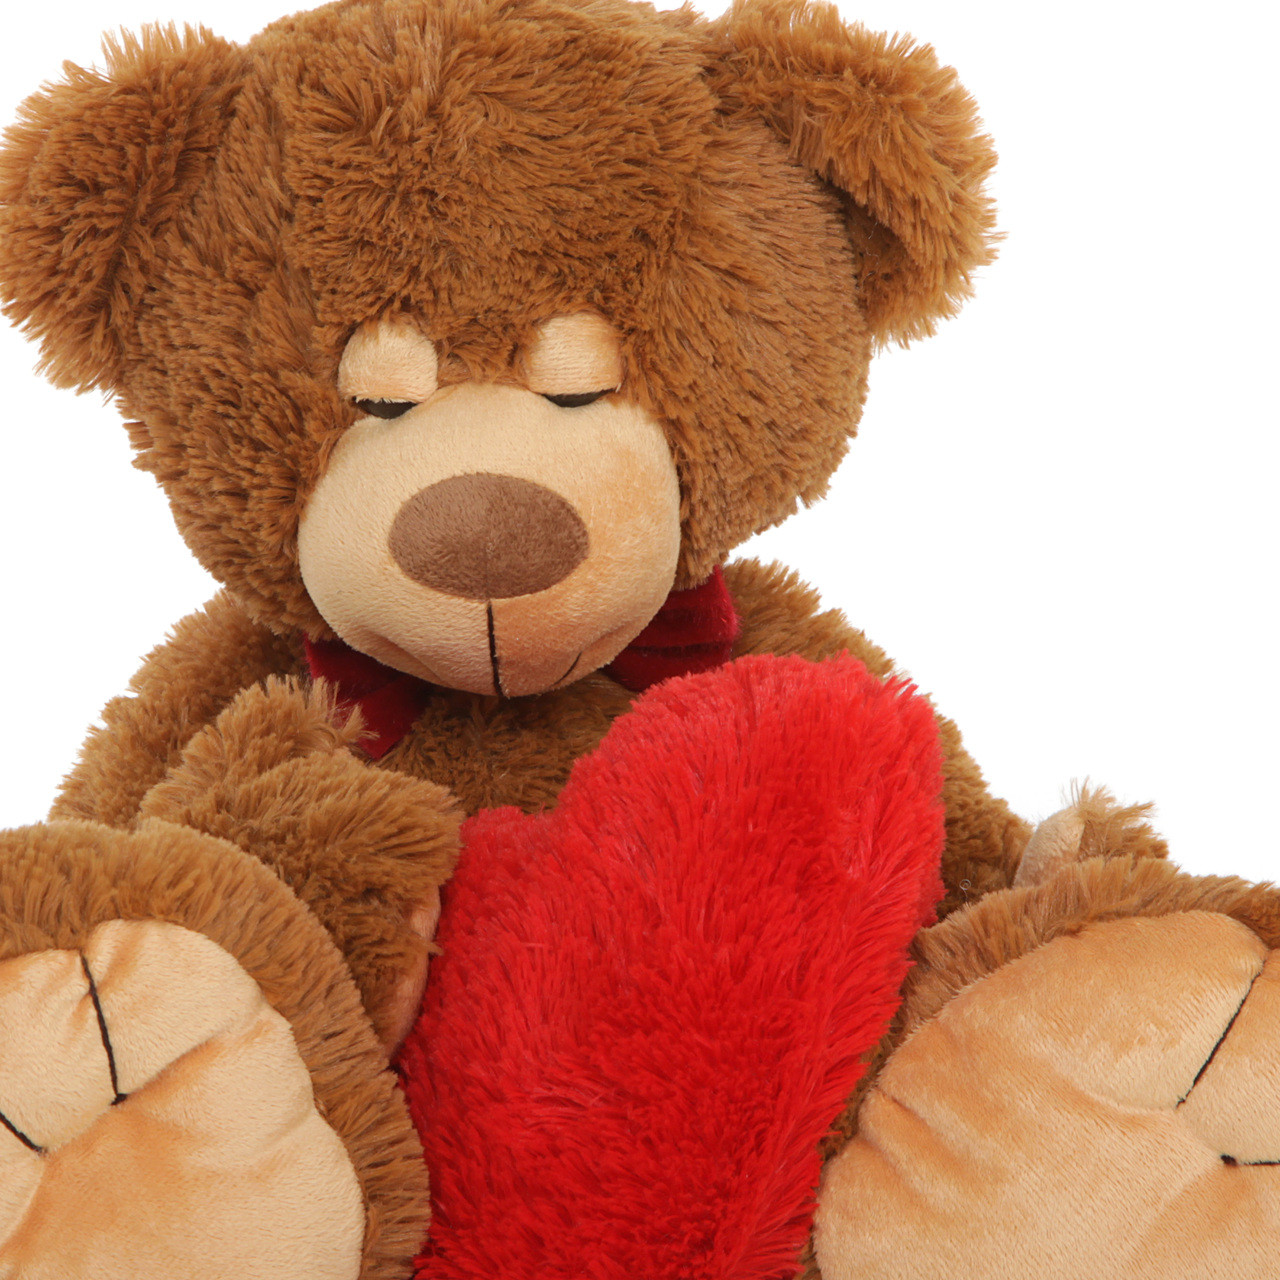 Chestnut Brown Teddy Bear Chester Mittens with Red Heart Pillow